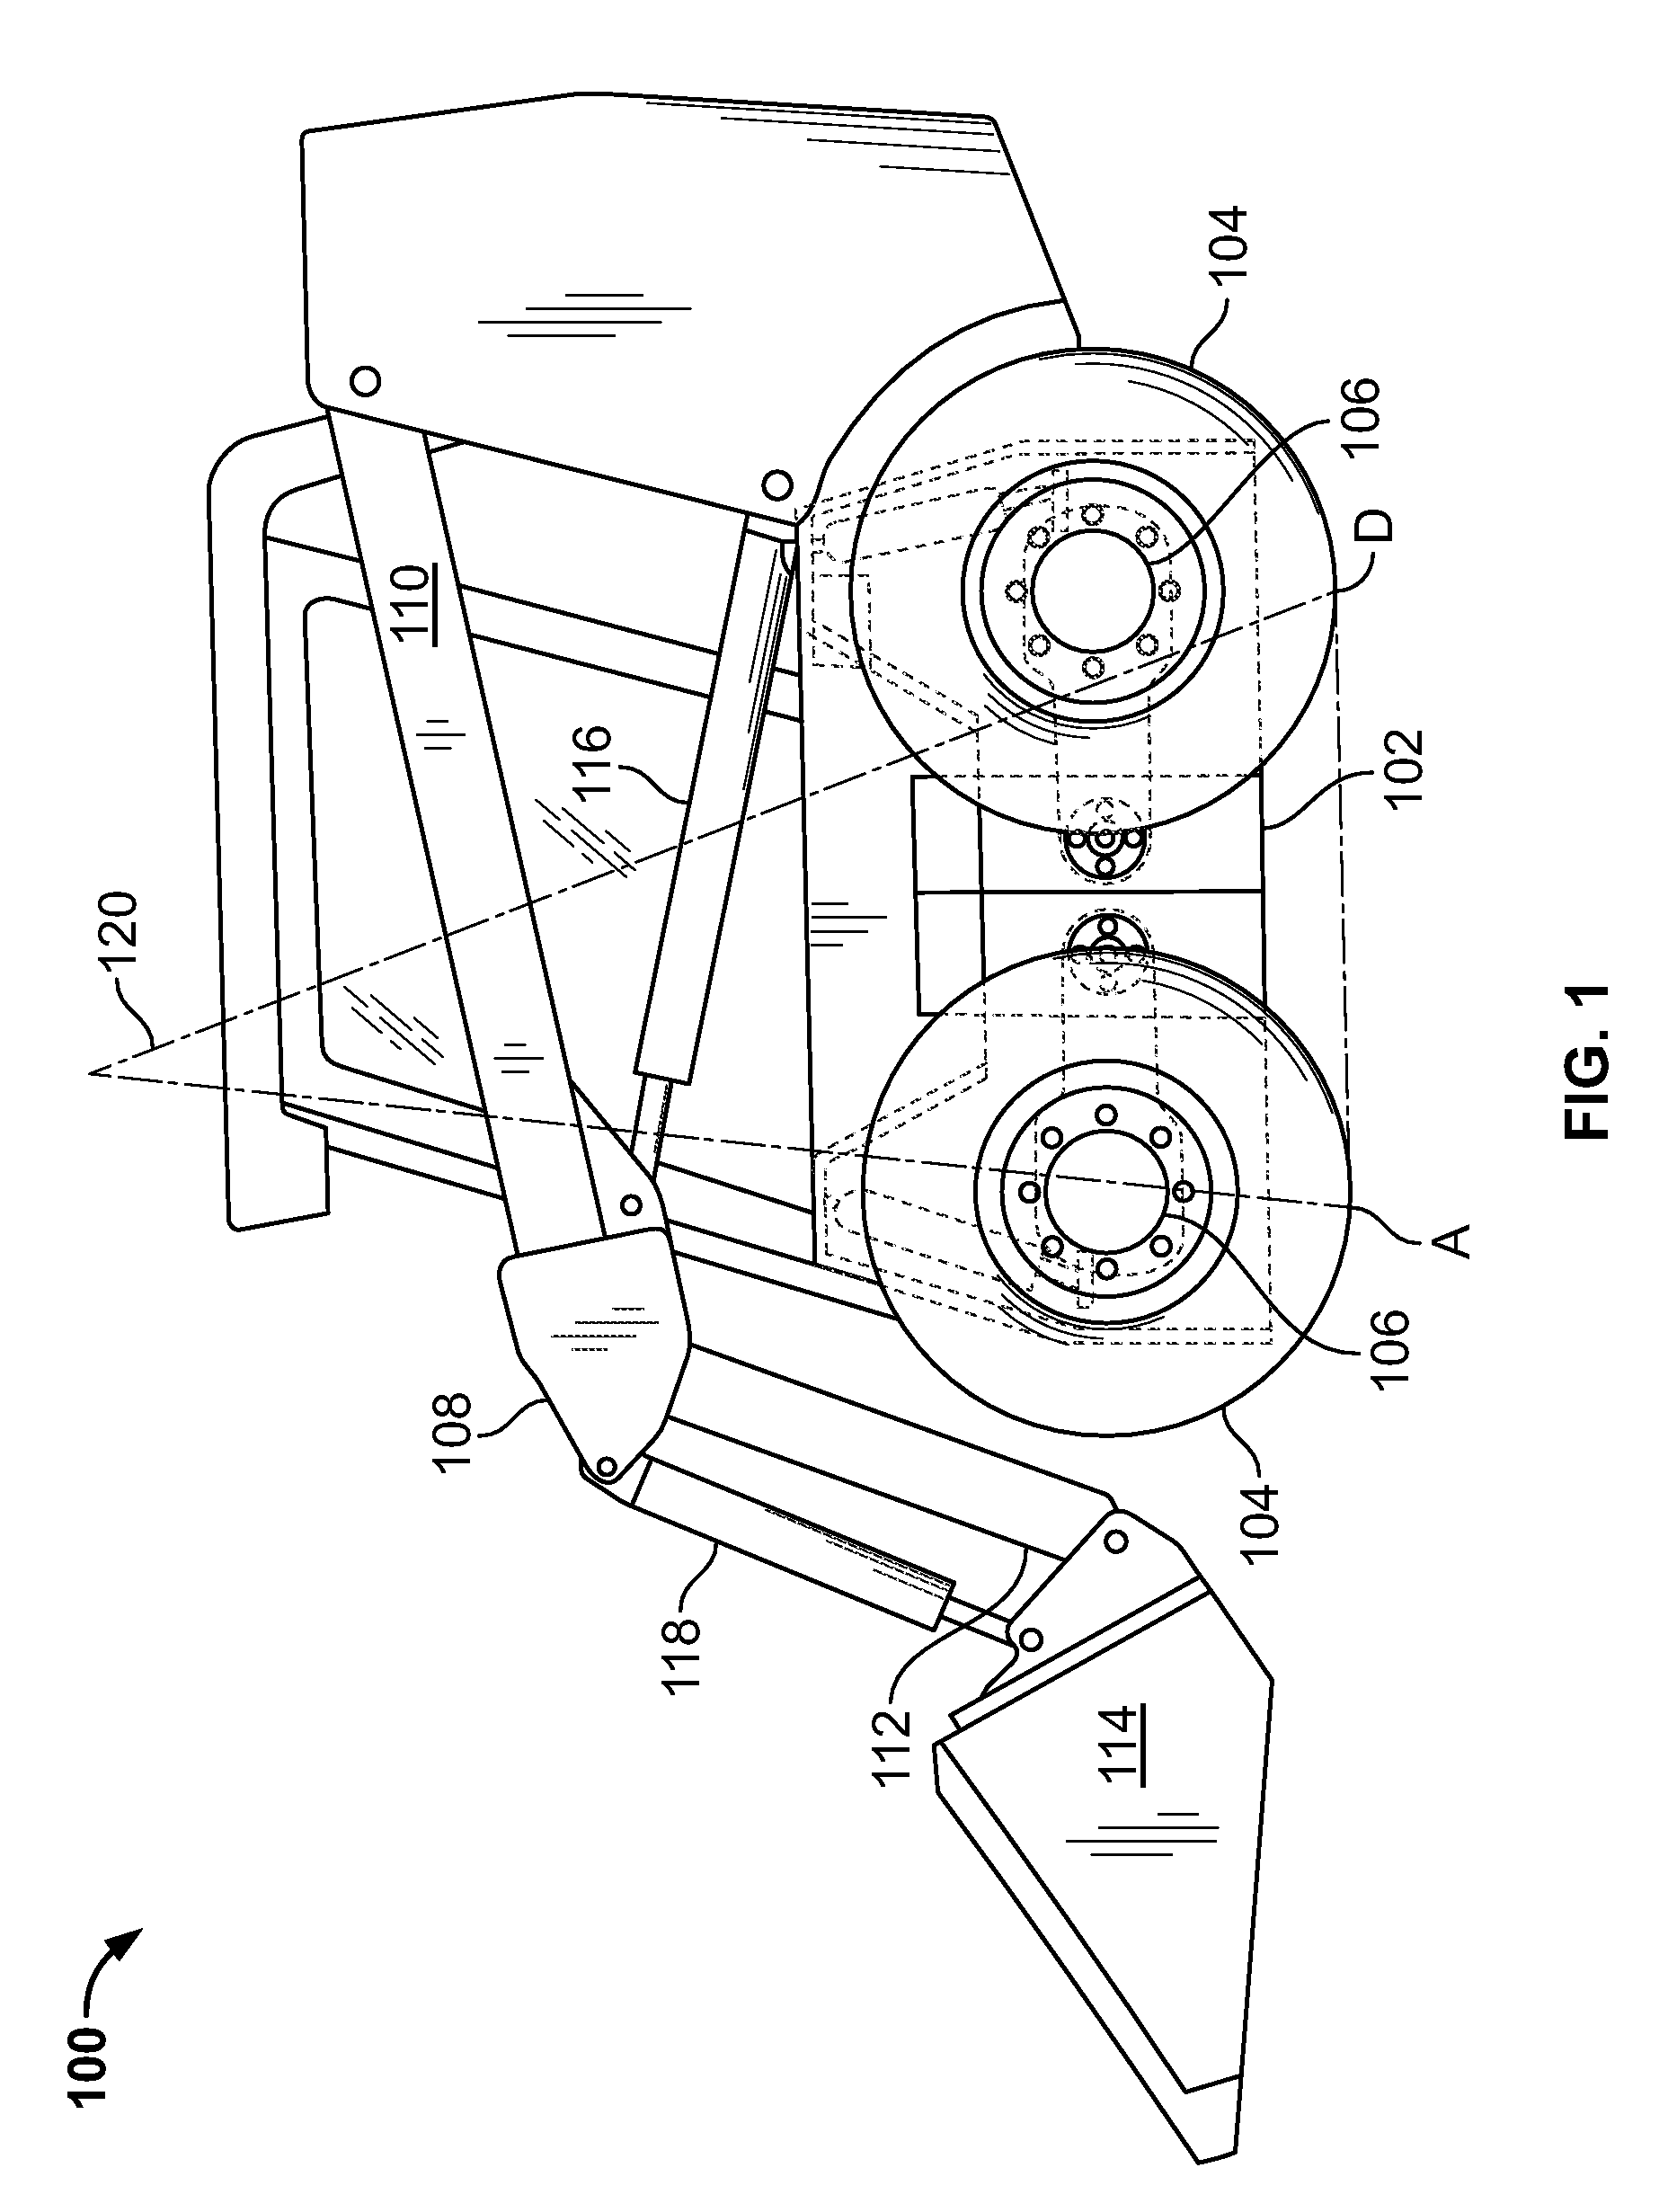 Acceleration control for vehicles having a loader arm